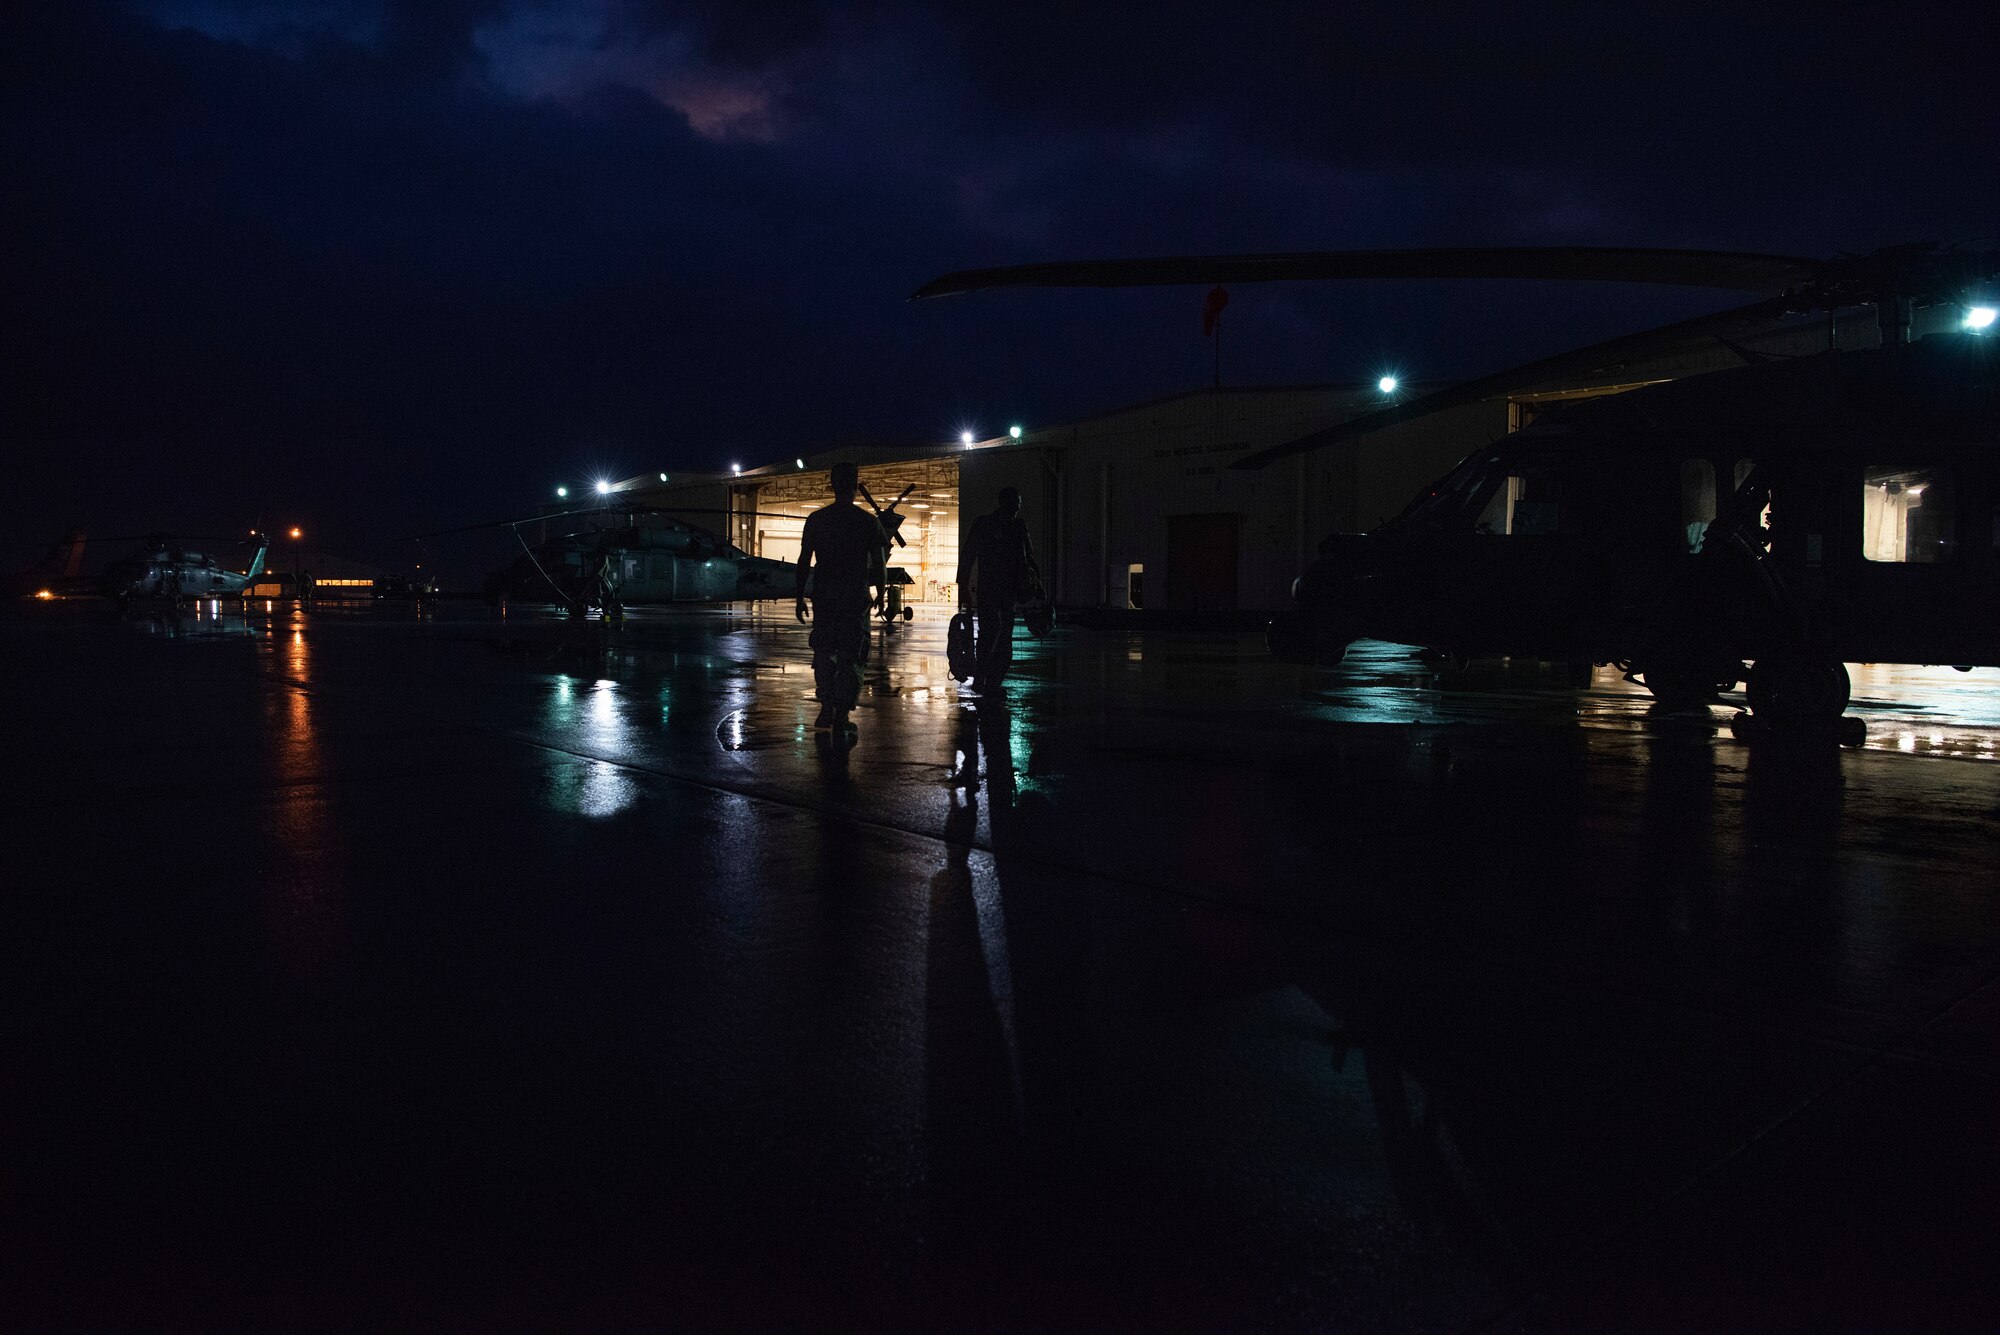 (Left) U.S. Air Force Airman 1st Class Howard Cowell, 33rd Rescue Squadron crew chief, finishes performing preflight safety checks as Lt. Col. Gabriel Brown, 33rd RQS commander, walks out to an HH-60 Pave Hawk before a flight Sept. 19, 2019, at Kadena Air Base, Japan. The HH-60 Pave Hawkhas a hoist capable of lifting up to 600 pounds during personnel recovery missions. (U.S. Air Force photo by Senior Airman Rhett Isbell)